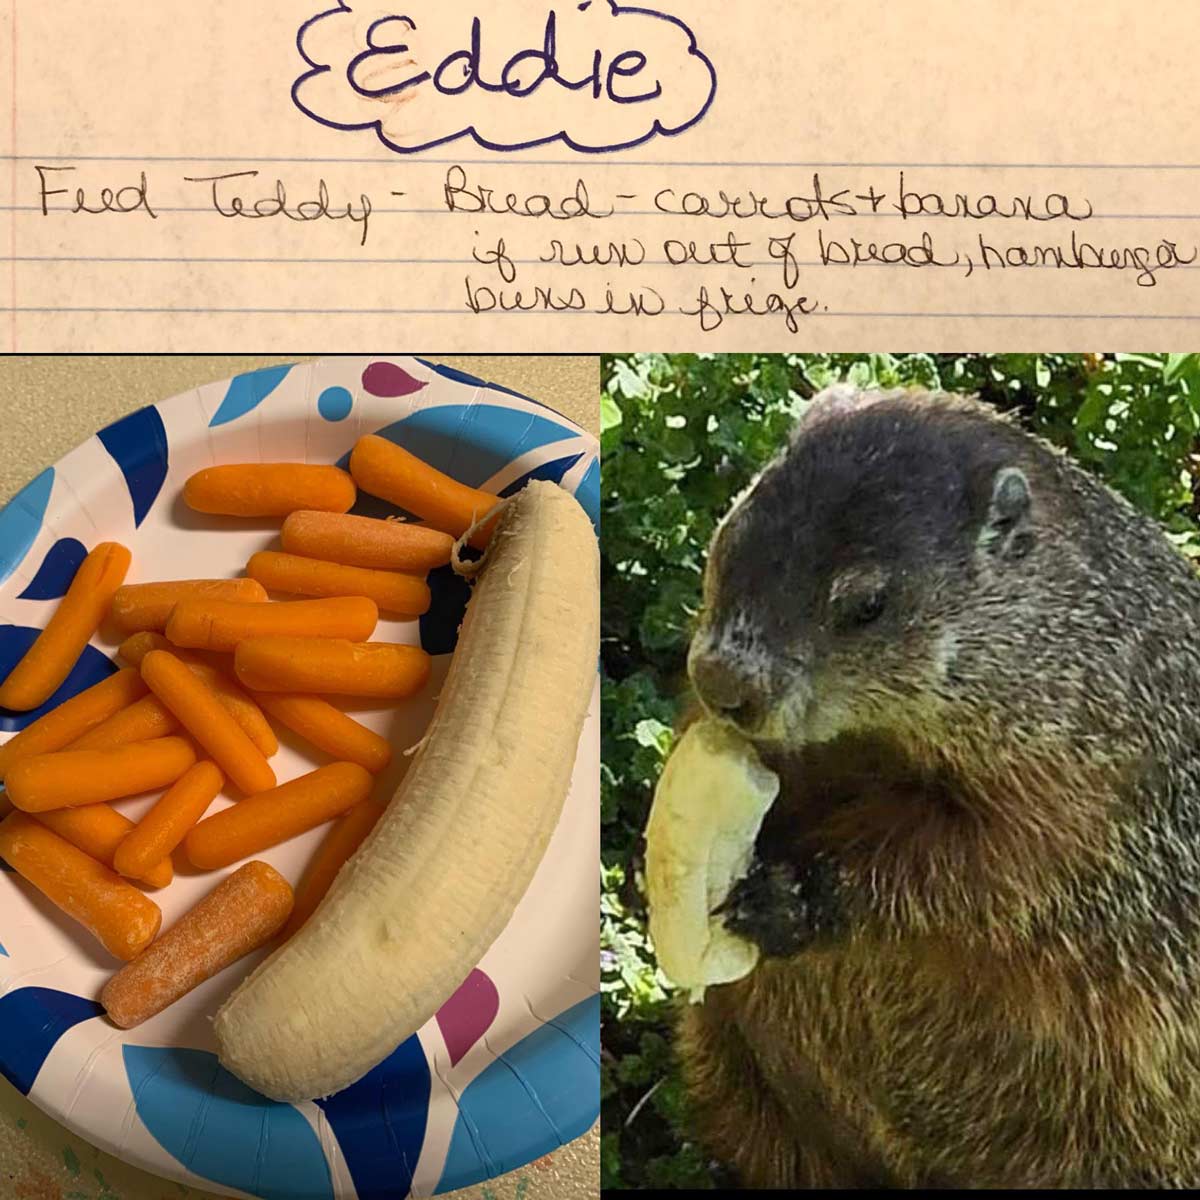 My Grandma went on vacation and left me a list of things to do at her house and one of them was leaving food for her groundhog Teddy